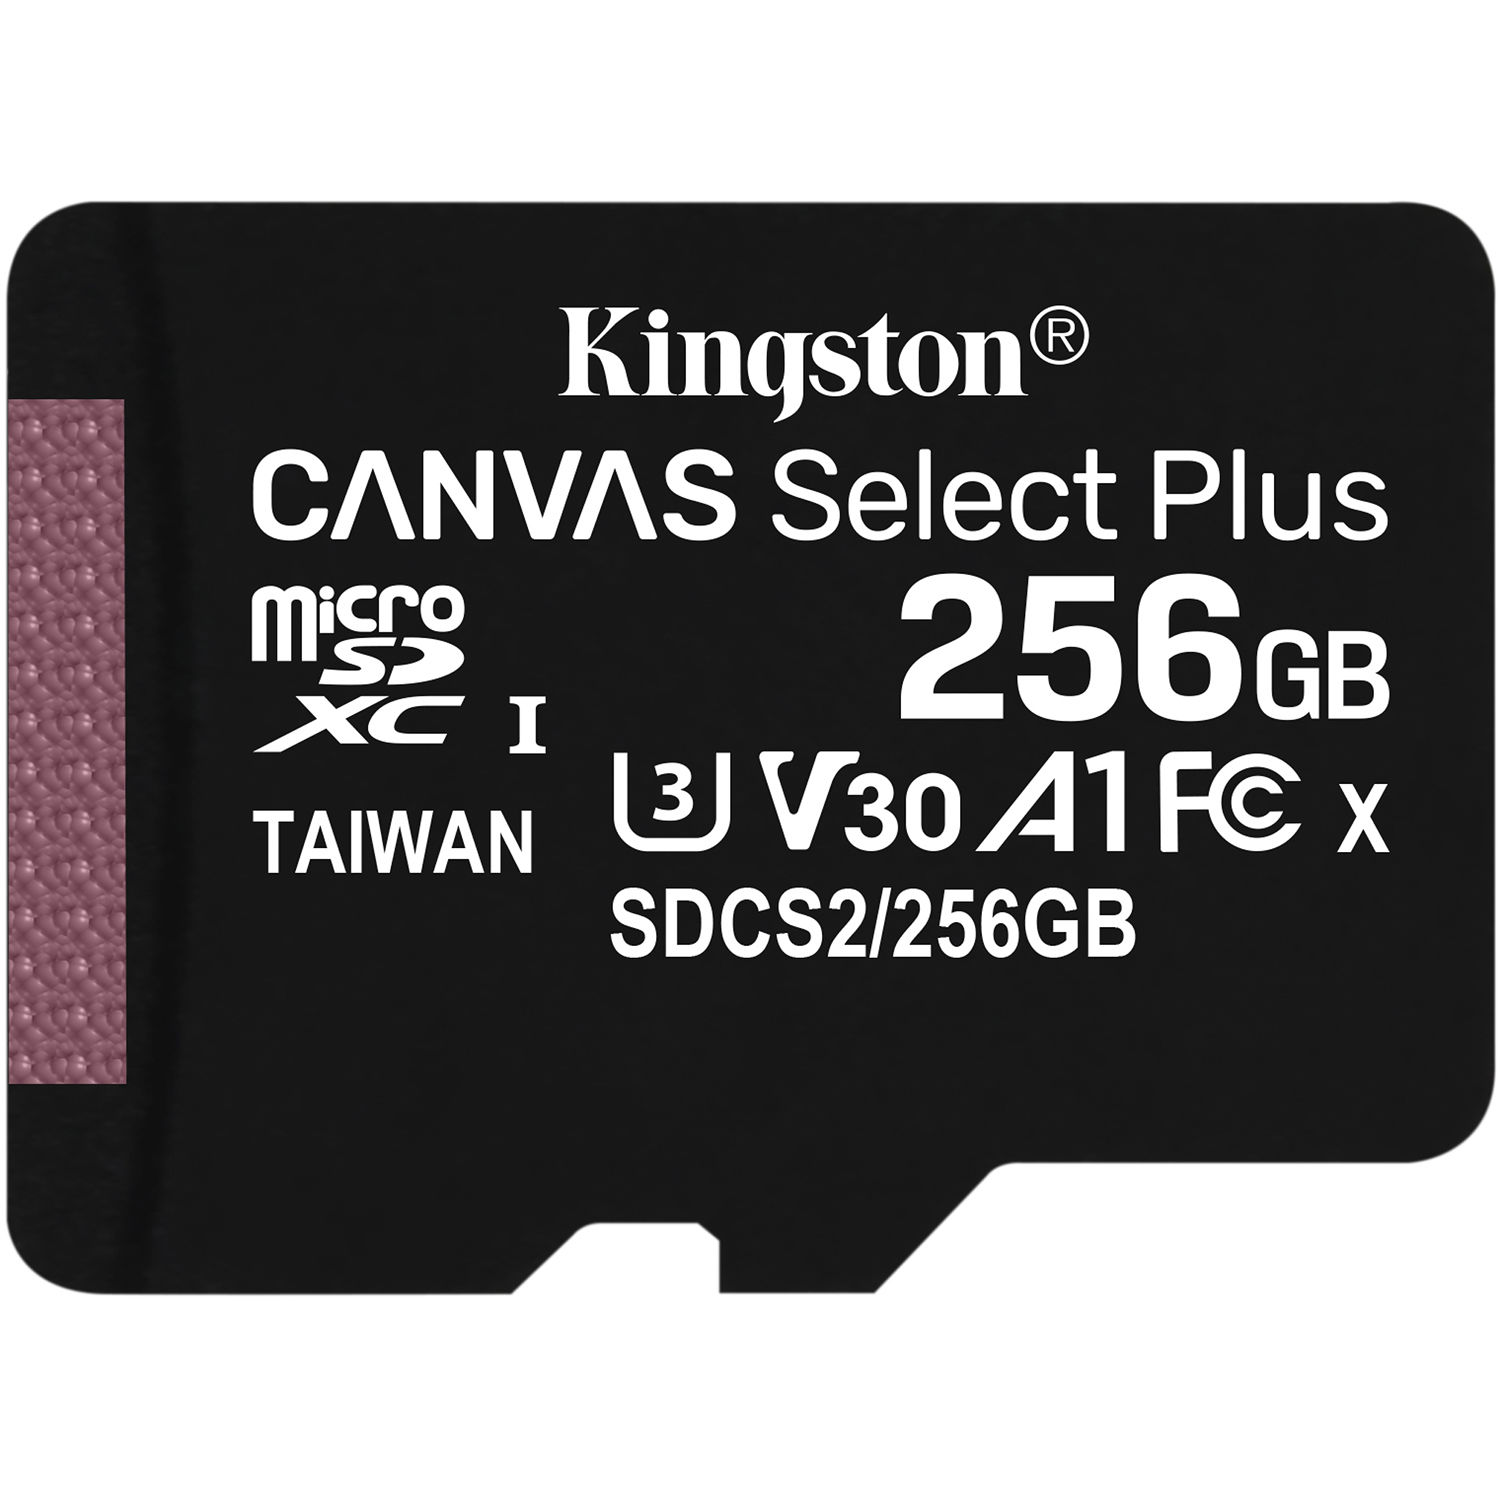 100MBs Works with Kingston Kingston 64GB LG Arena 2 MicroSDXC Canvas Select Plus Card Verified by SanFlash.